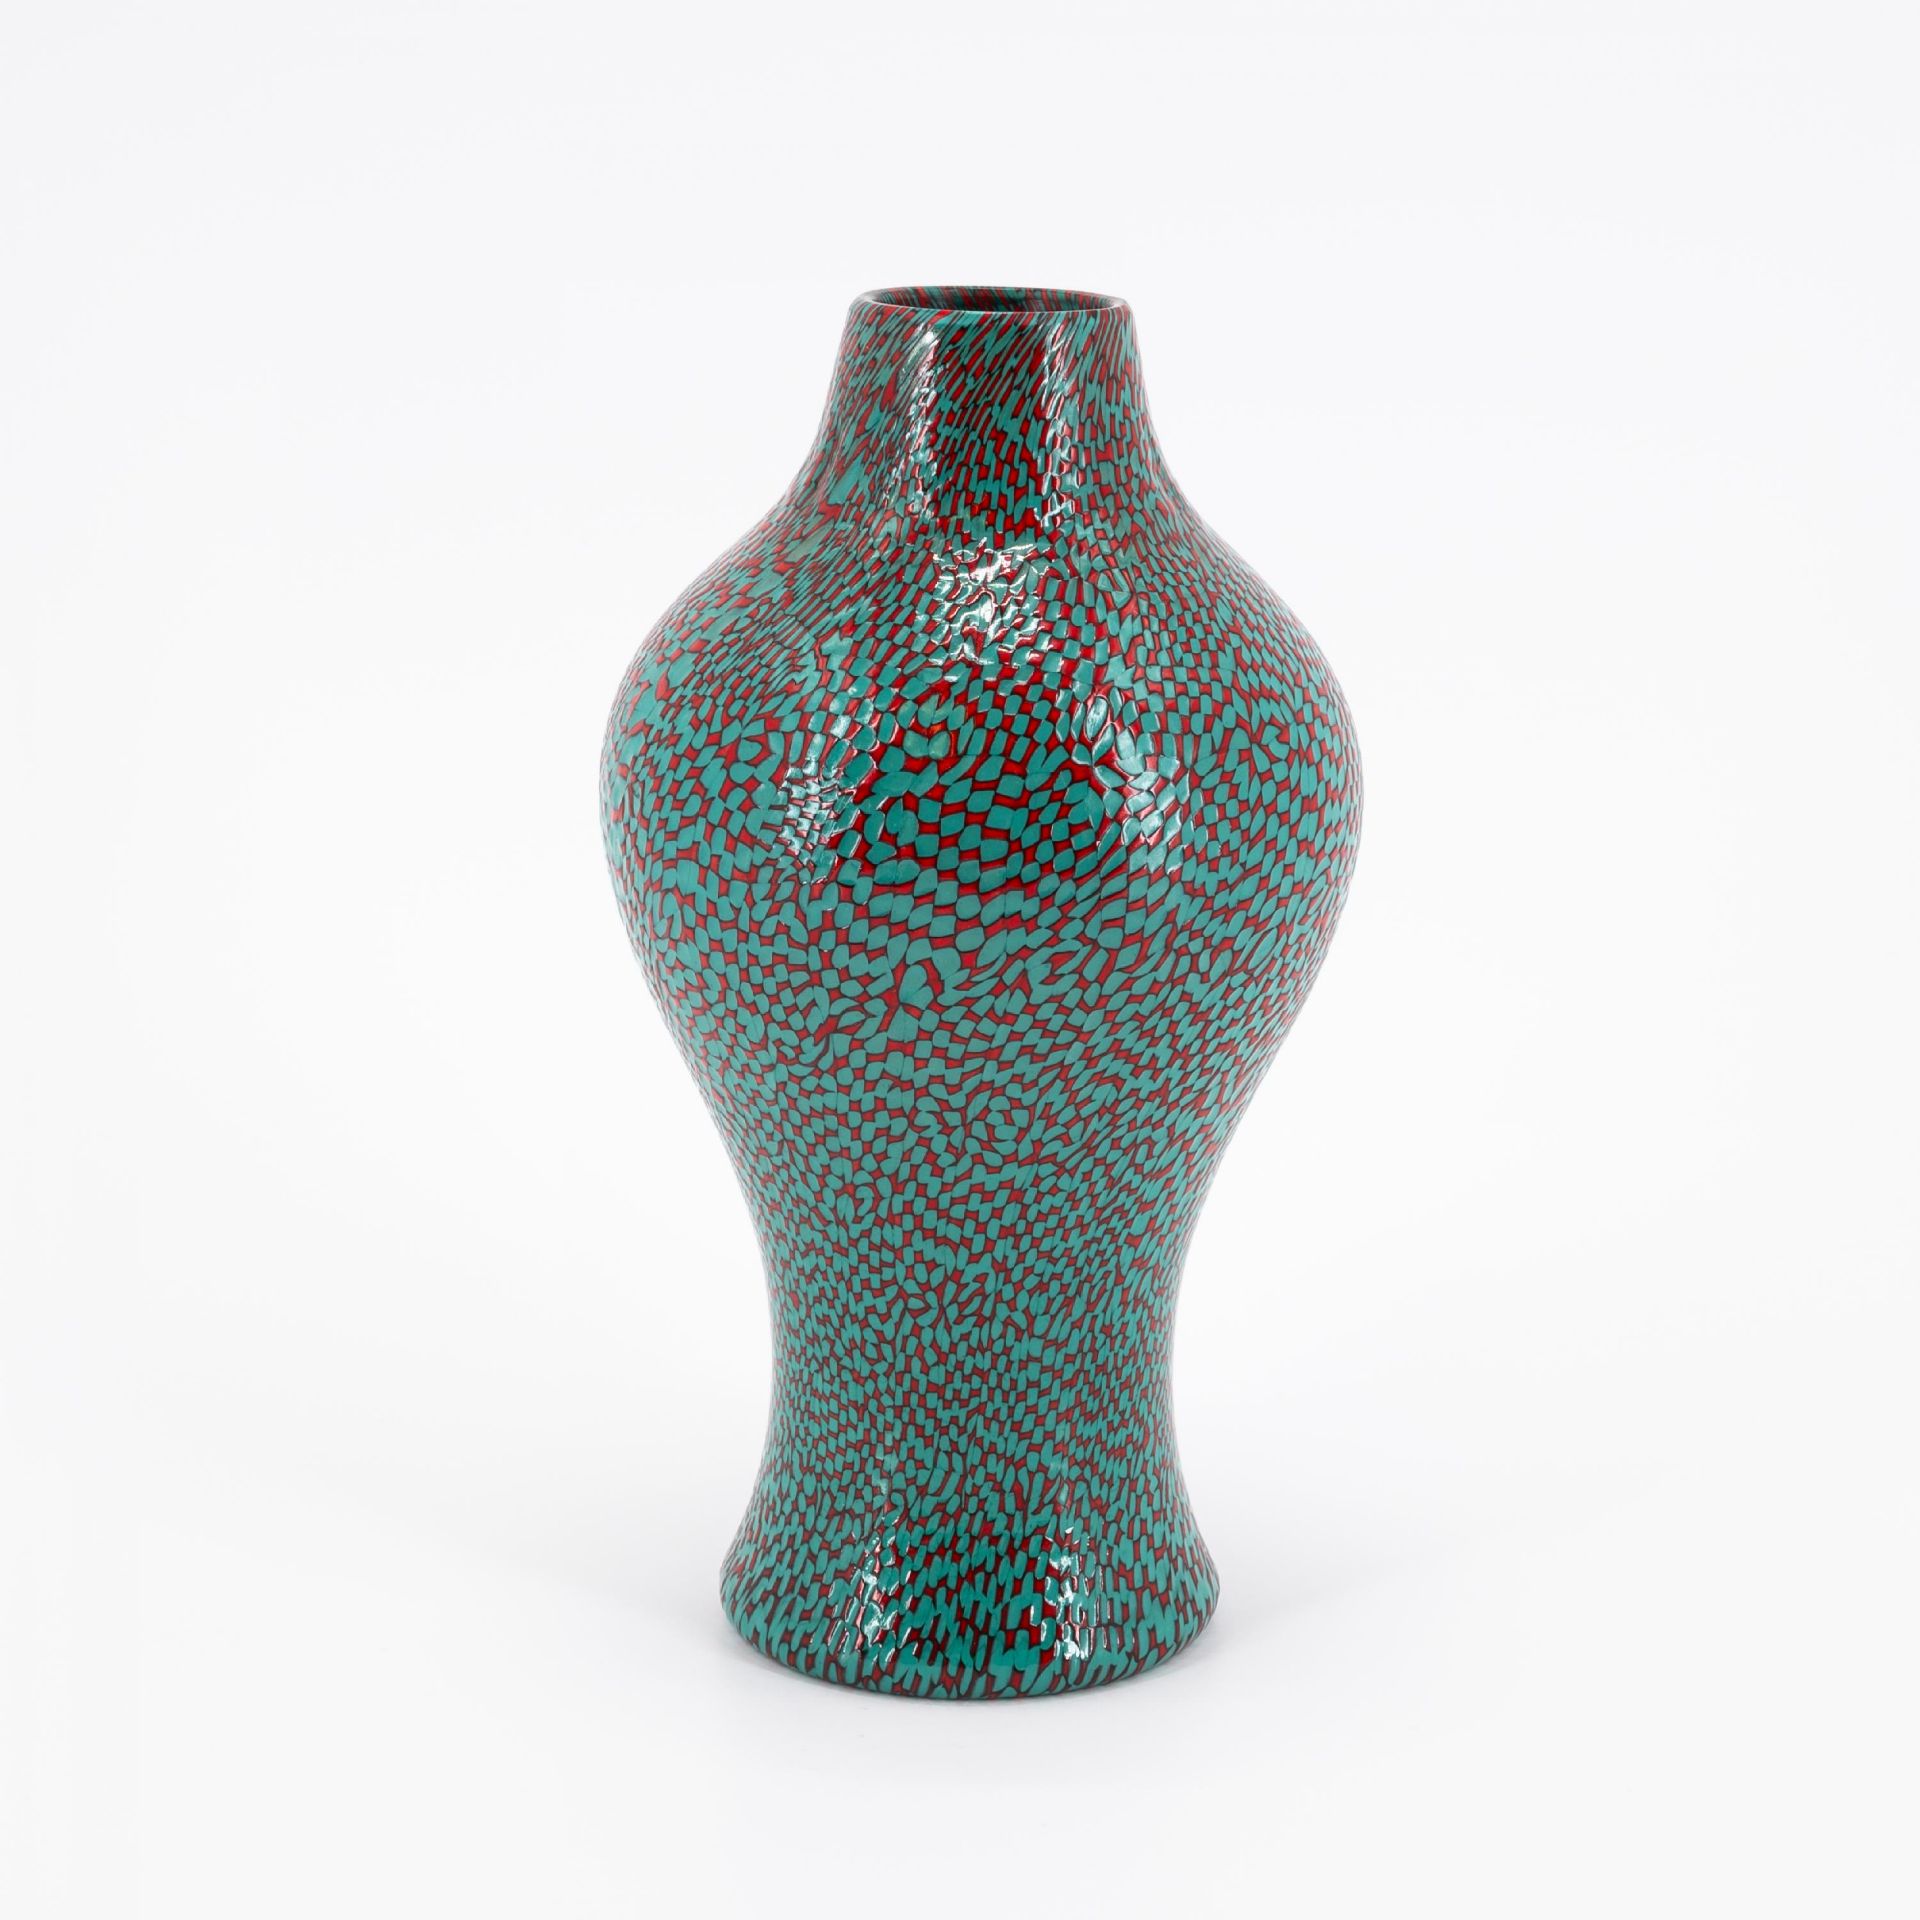 GLASS VASE WITH DeCOR 'A DAMA' - Image 3 of 7